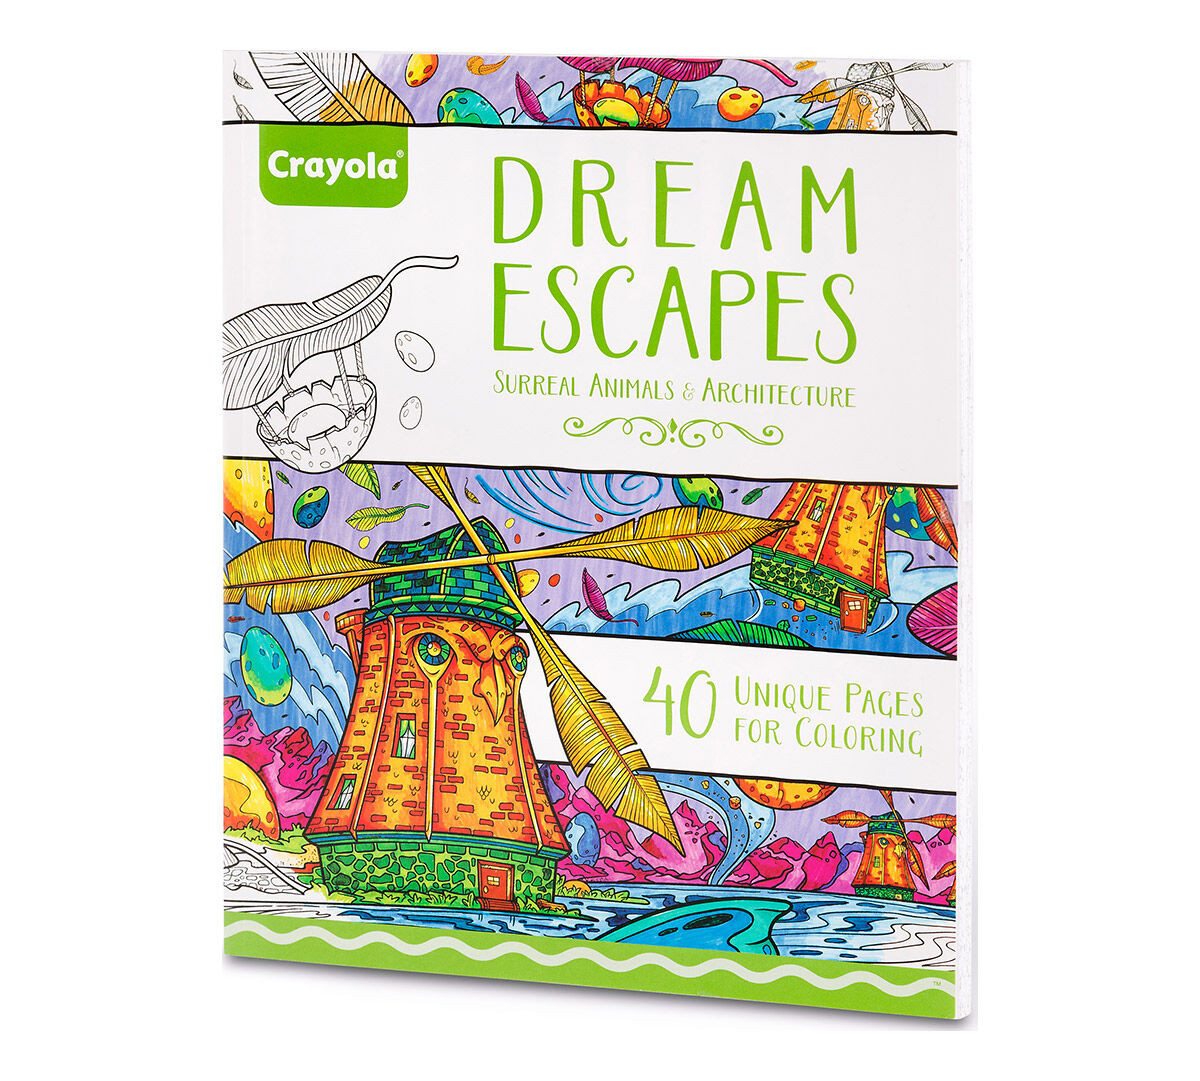 Adult Coloring Books Crayola
 Crayola Dream Escapes Adult Coloring Art Activity 40